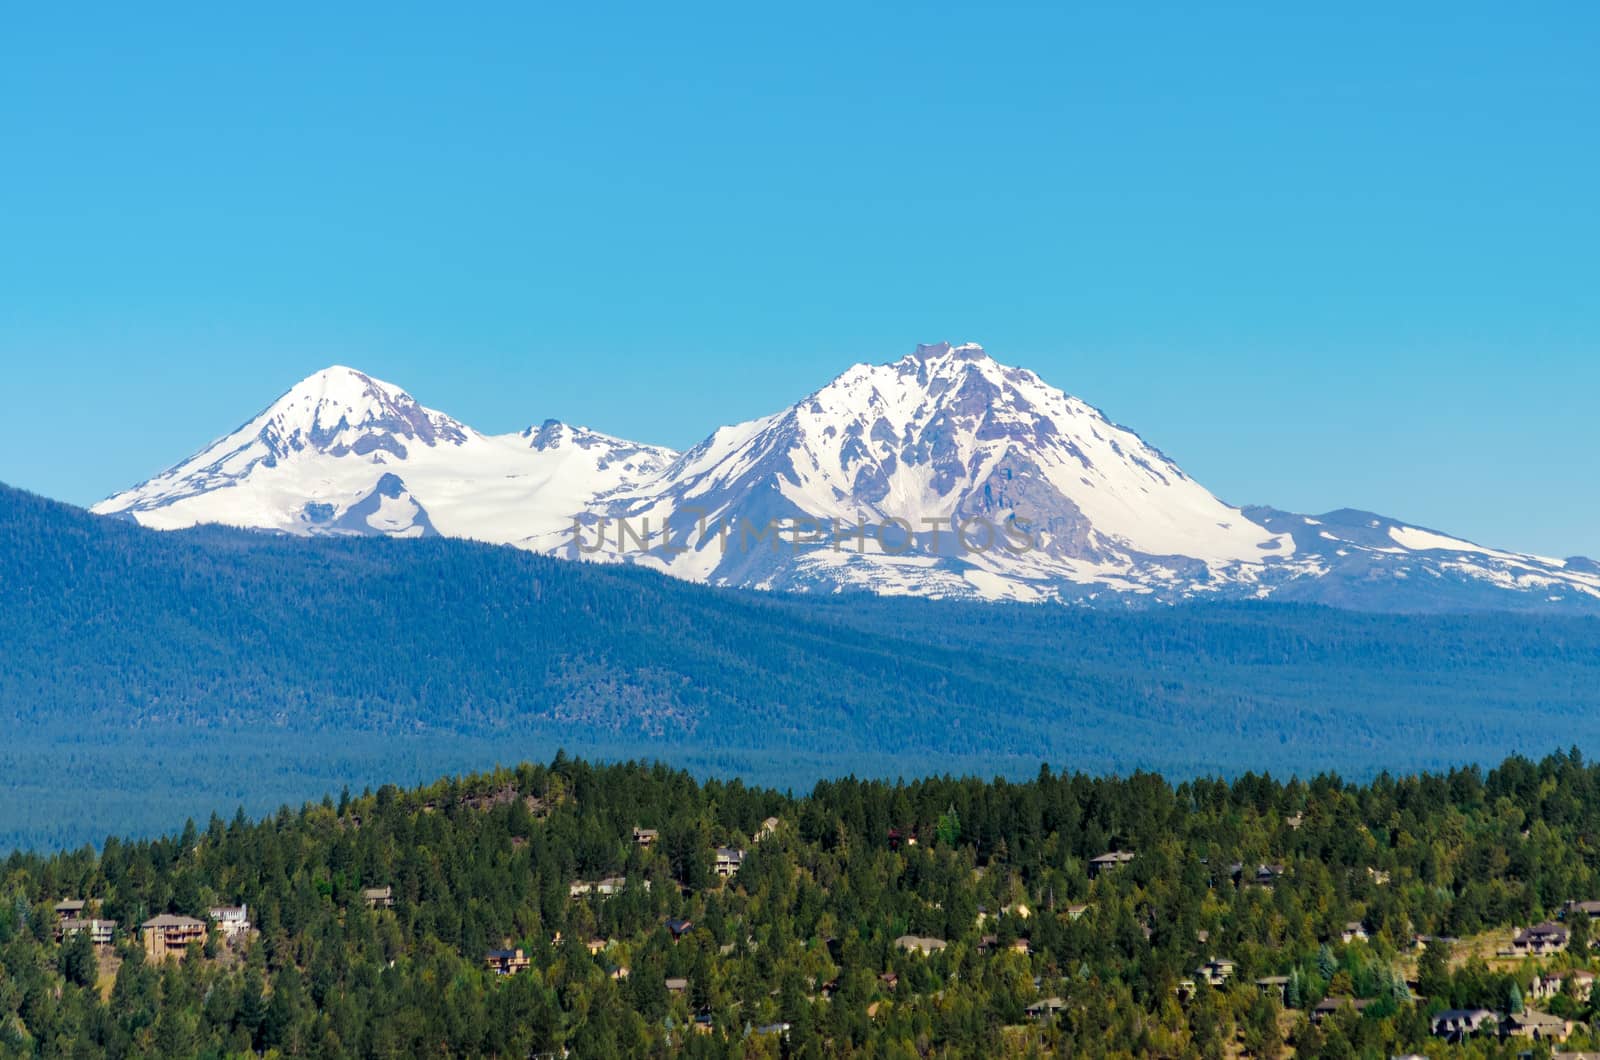 View of the snow covered Three Sisters mountains in the Cascade Range